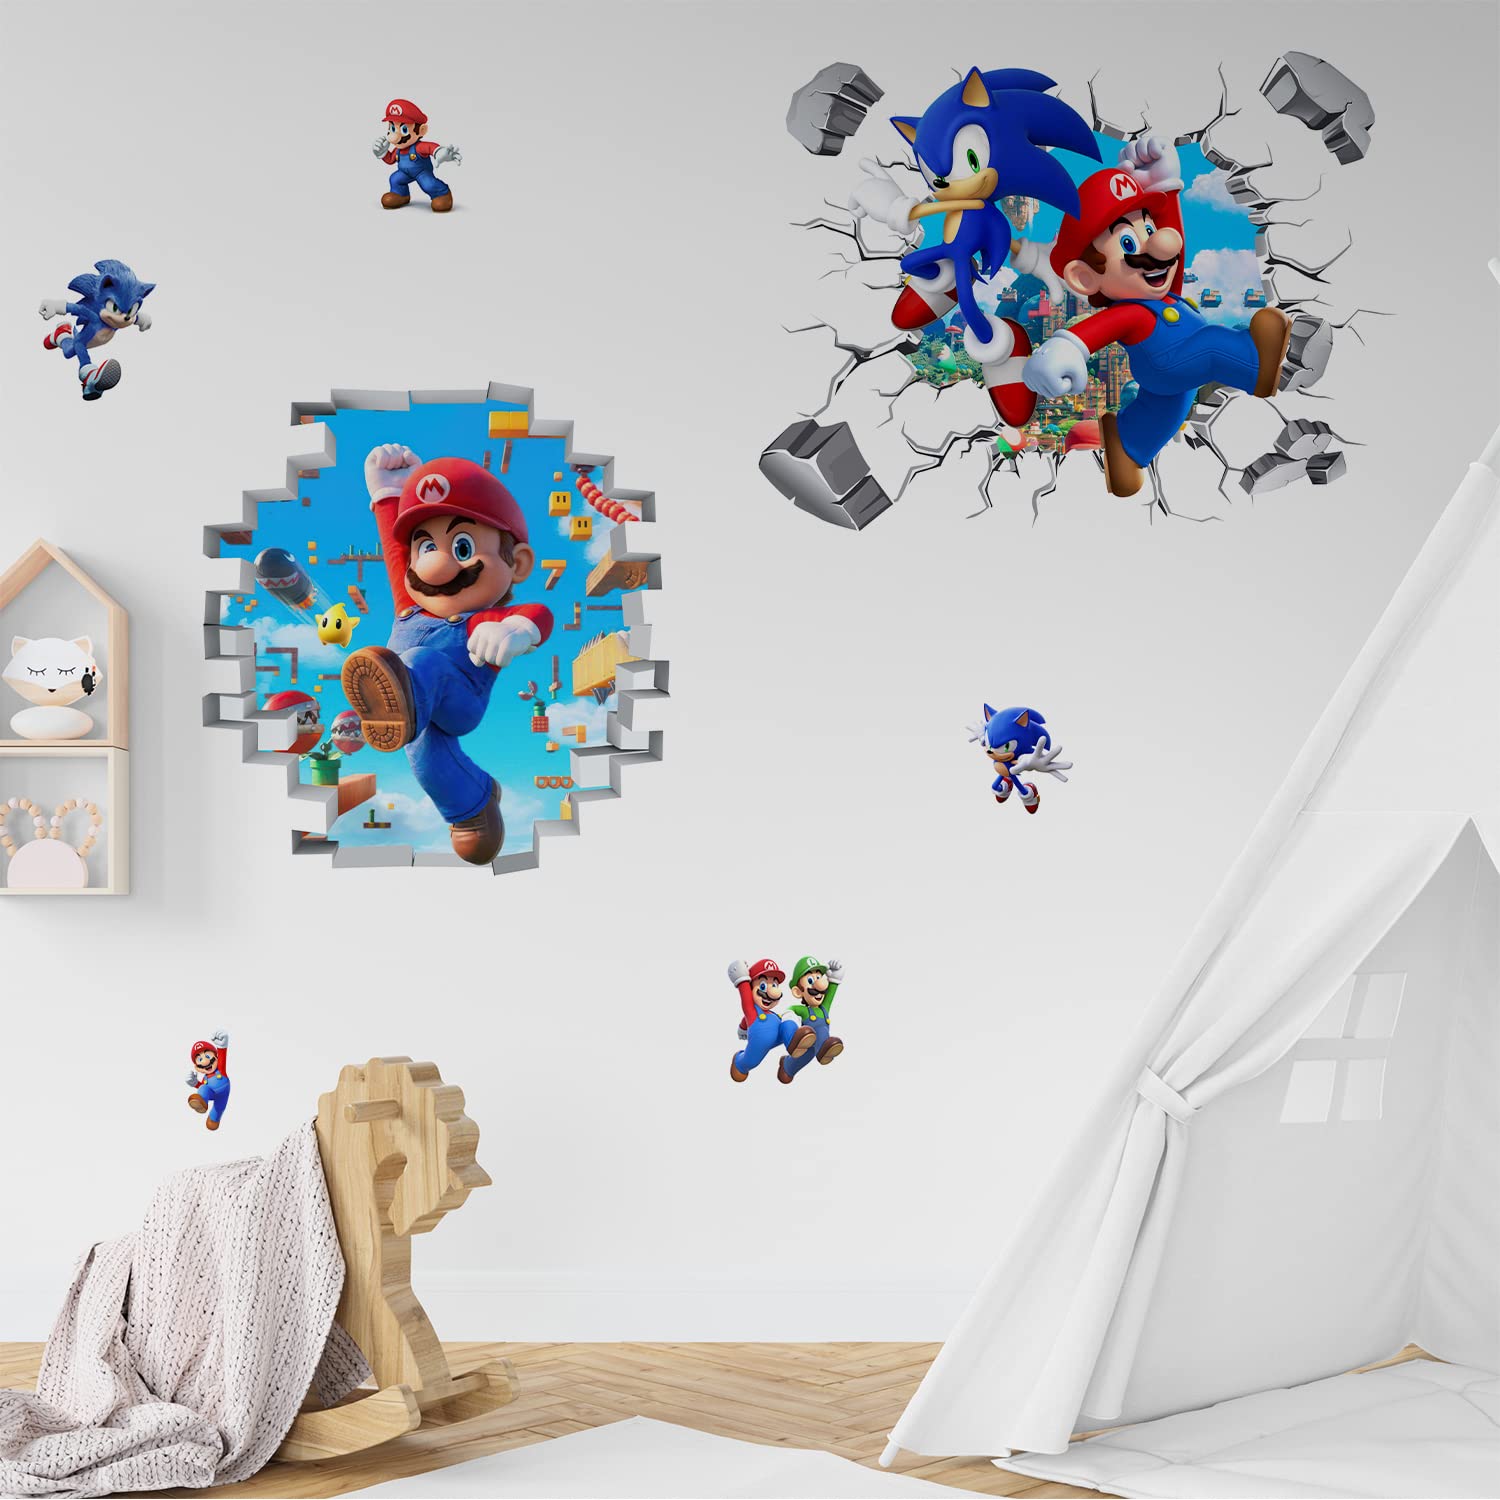 Mario Bros Movie 2023 Wall 3D Break The Wall Stickers for Living Room Kids Room Wall Decor Boys Girl Gift Bedroom Poster Mural Wallpaper Removable PVC Wall Stickers (Style4)